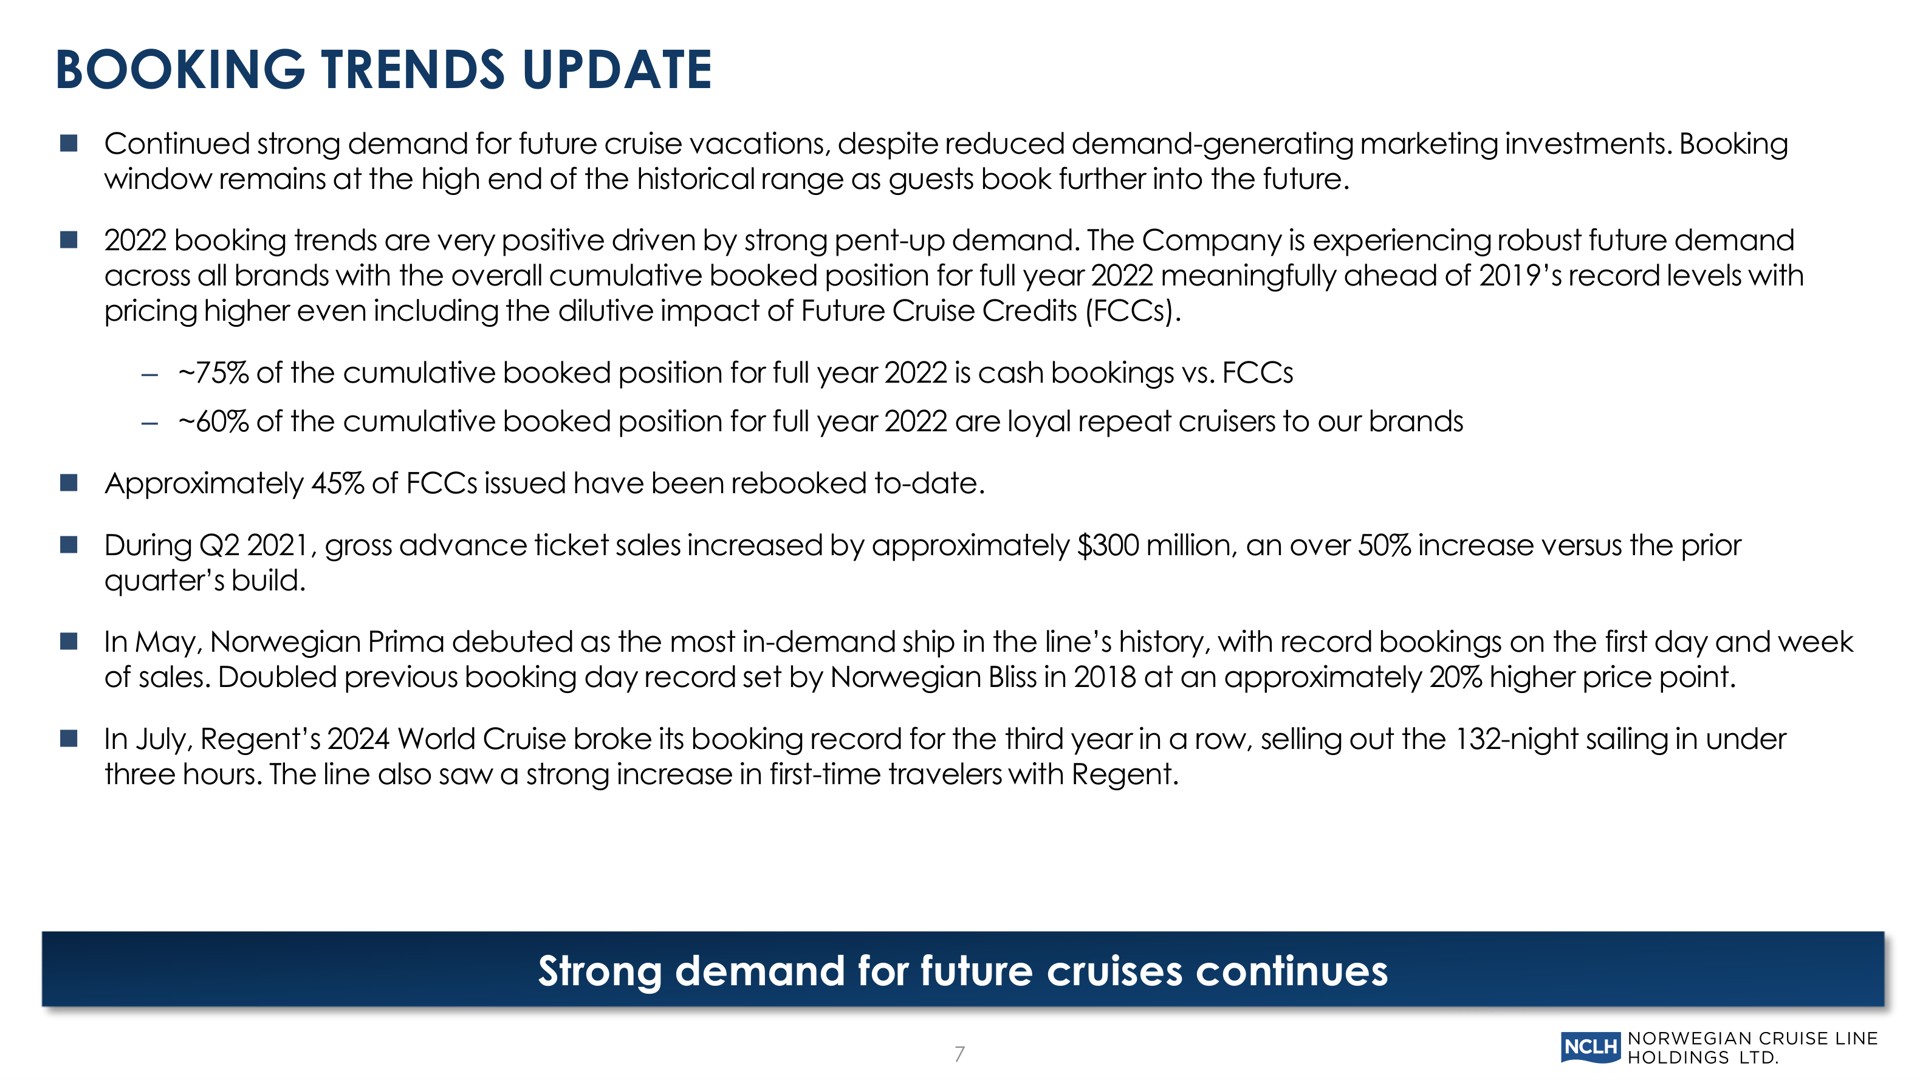 booking trends update strong demand for future cruises continues | Norwegian Cruise Line